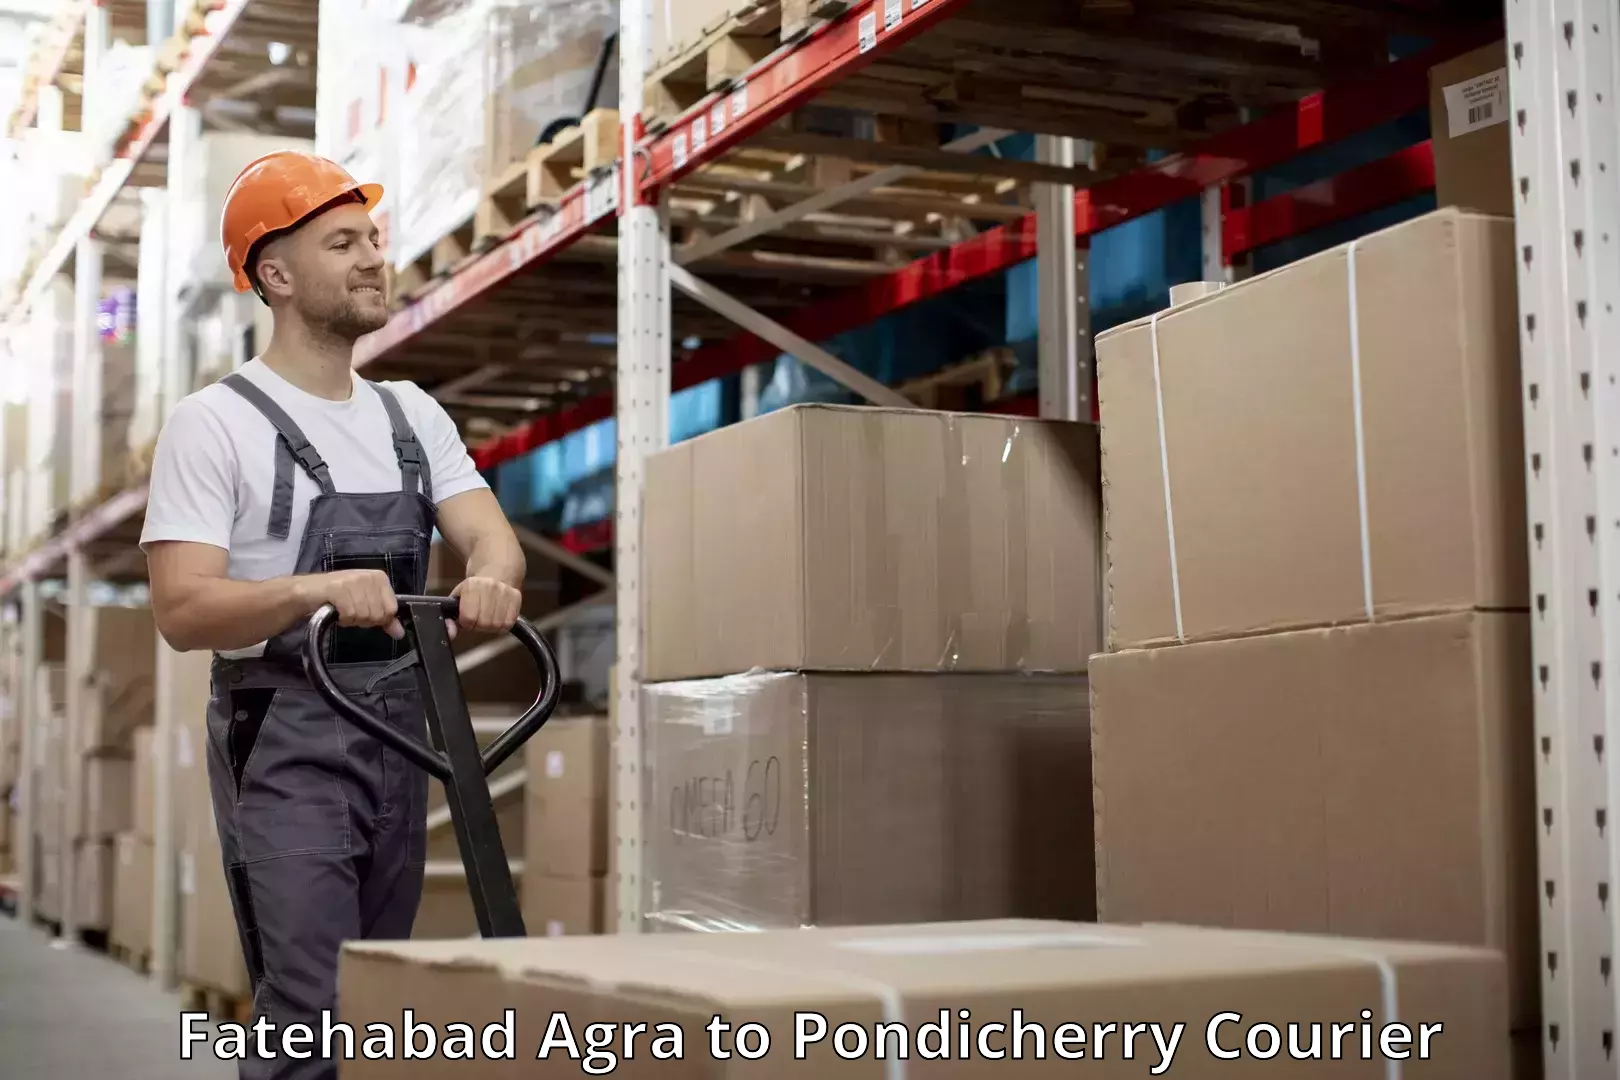 Baggage shipping experience Fatehabad Agra to Pondicherry